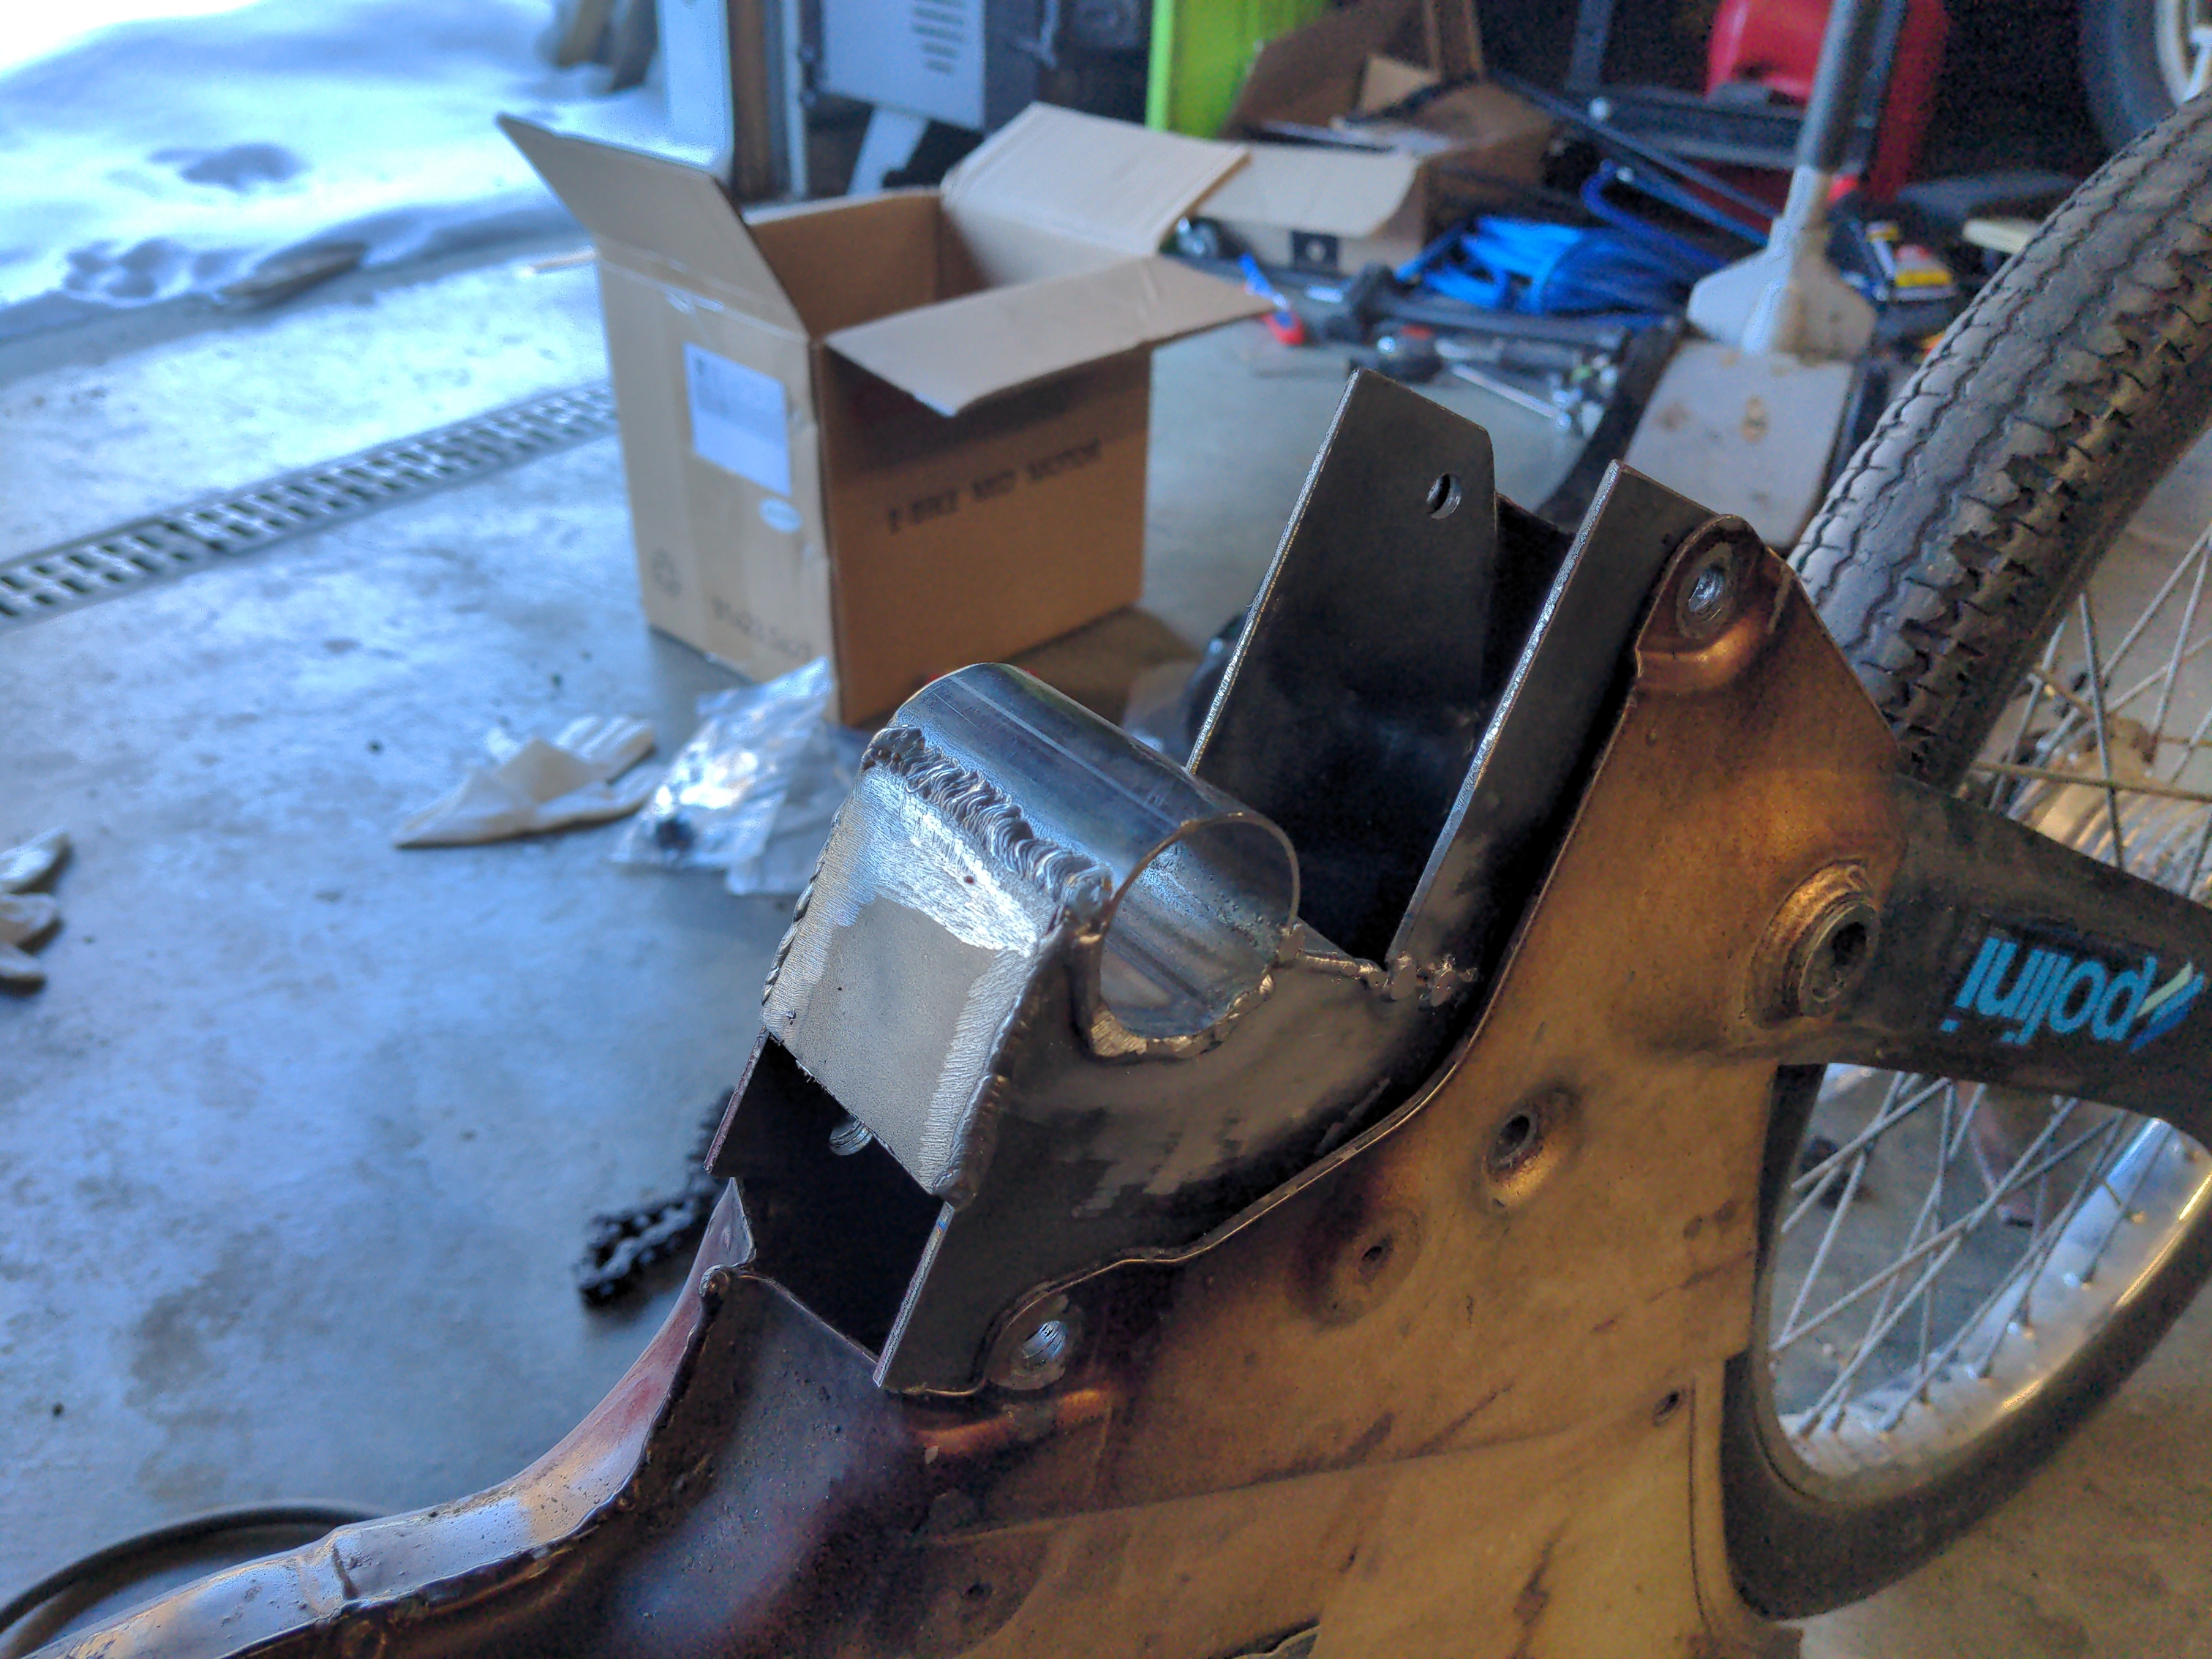 A custom fabricated metal bracket, slotted into the frame of a Puch moped. The bolt holes in the bracket line up nicely with the holes in the frame. The welds are a little rough, but serviceable.